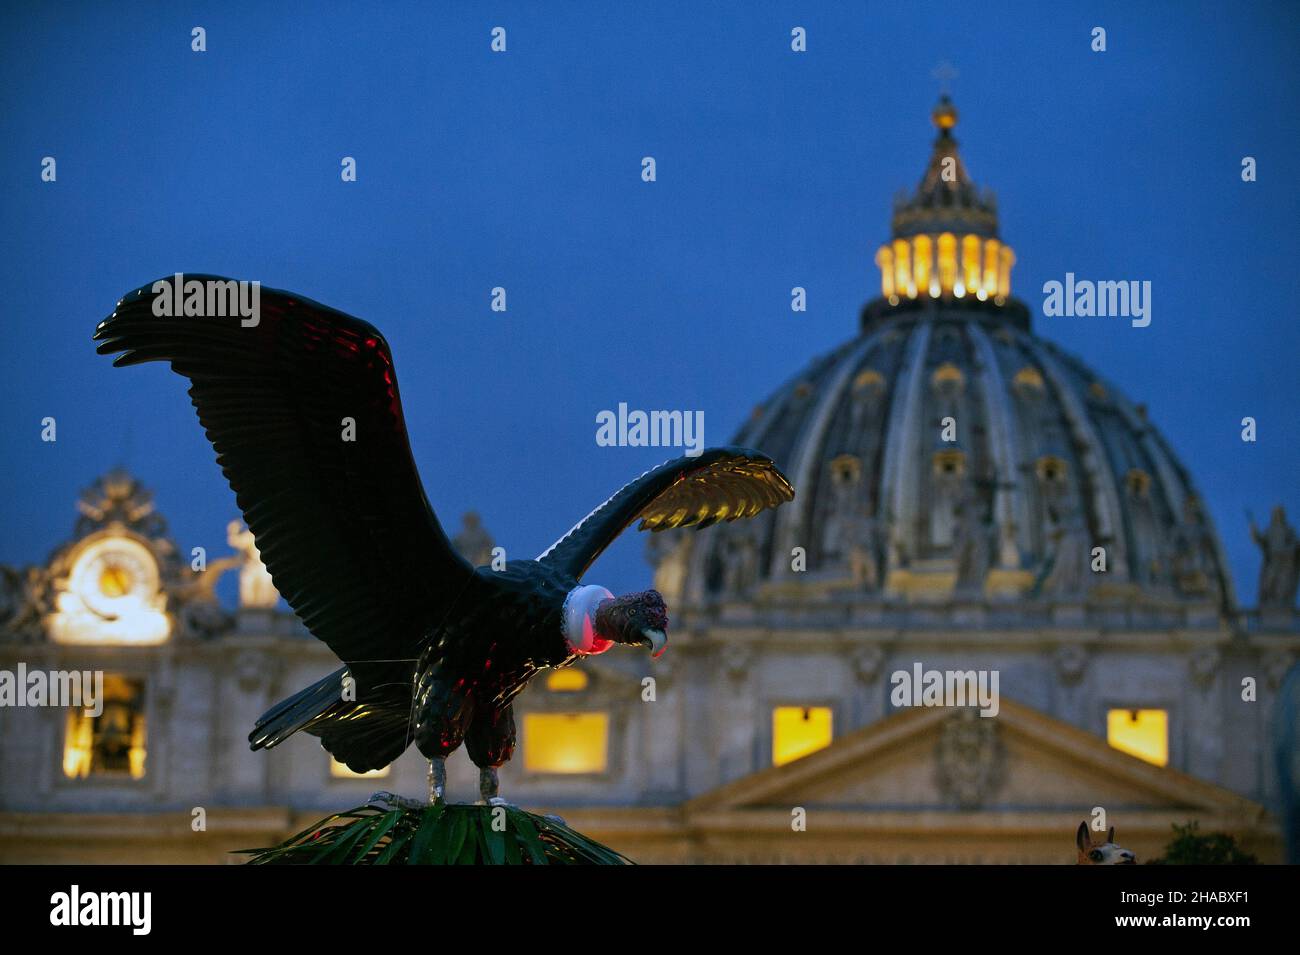 Italy, Rome, Vatican, 2021/12/11. A general view shows The Vatican's Christmas Tree and Nativity Scene at St. Peter's Square at the Vatican Photograph by Alessia Giuliani / Catholic Press Photo RESTRICTED TO EDITORIAL USE - NO MARKETING - NO ADVERTISING CAMPAIGNS. Stock Photo